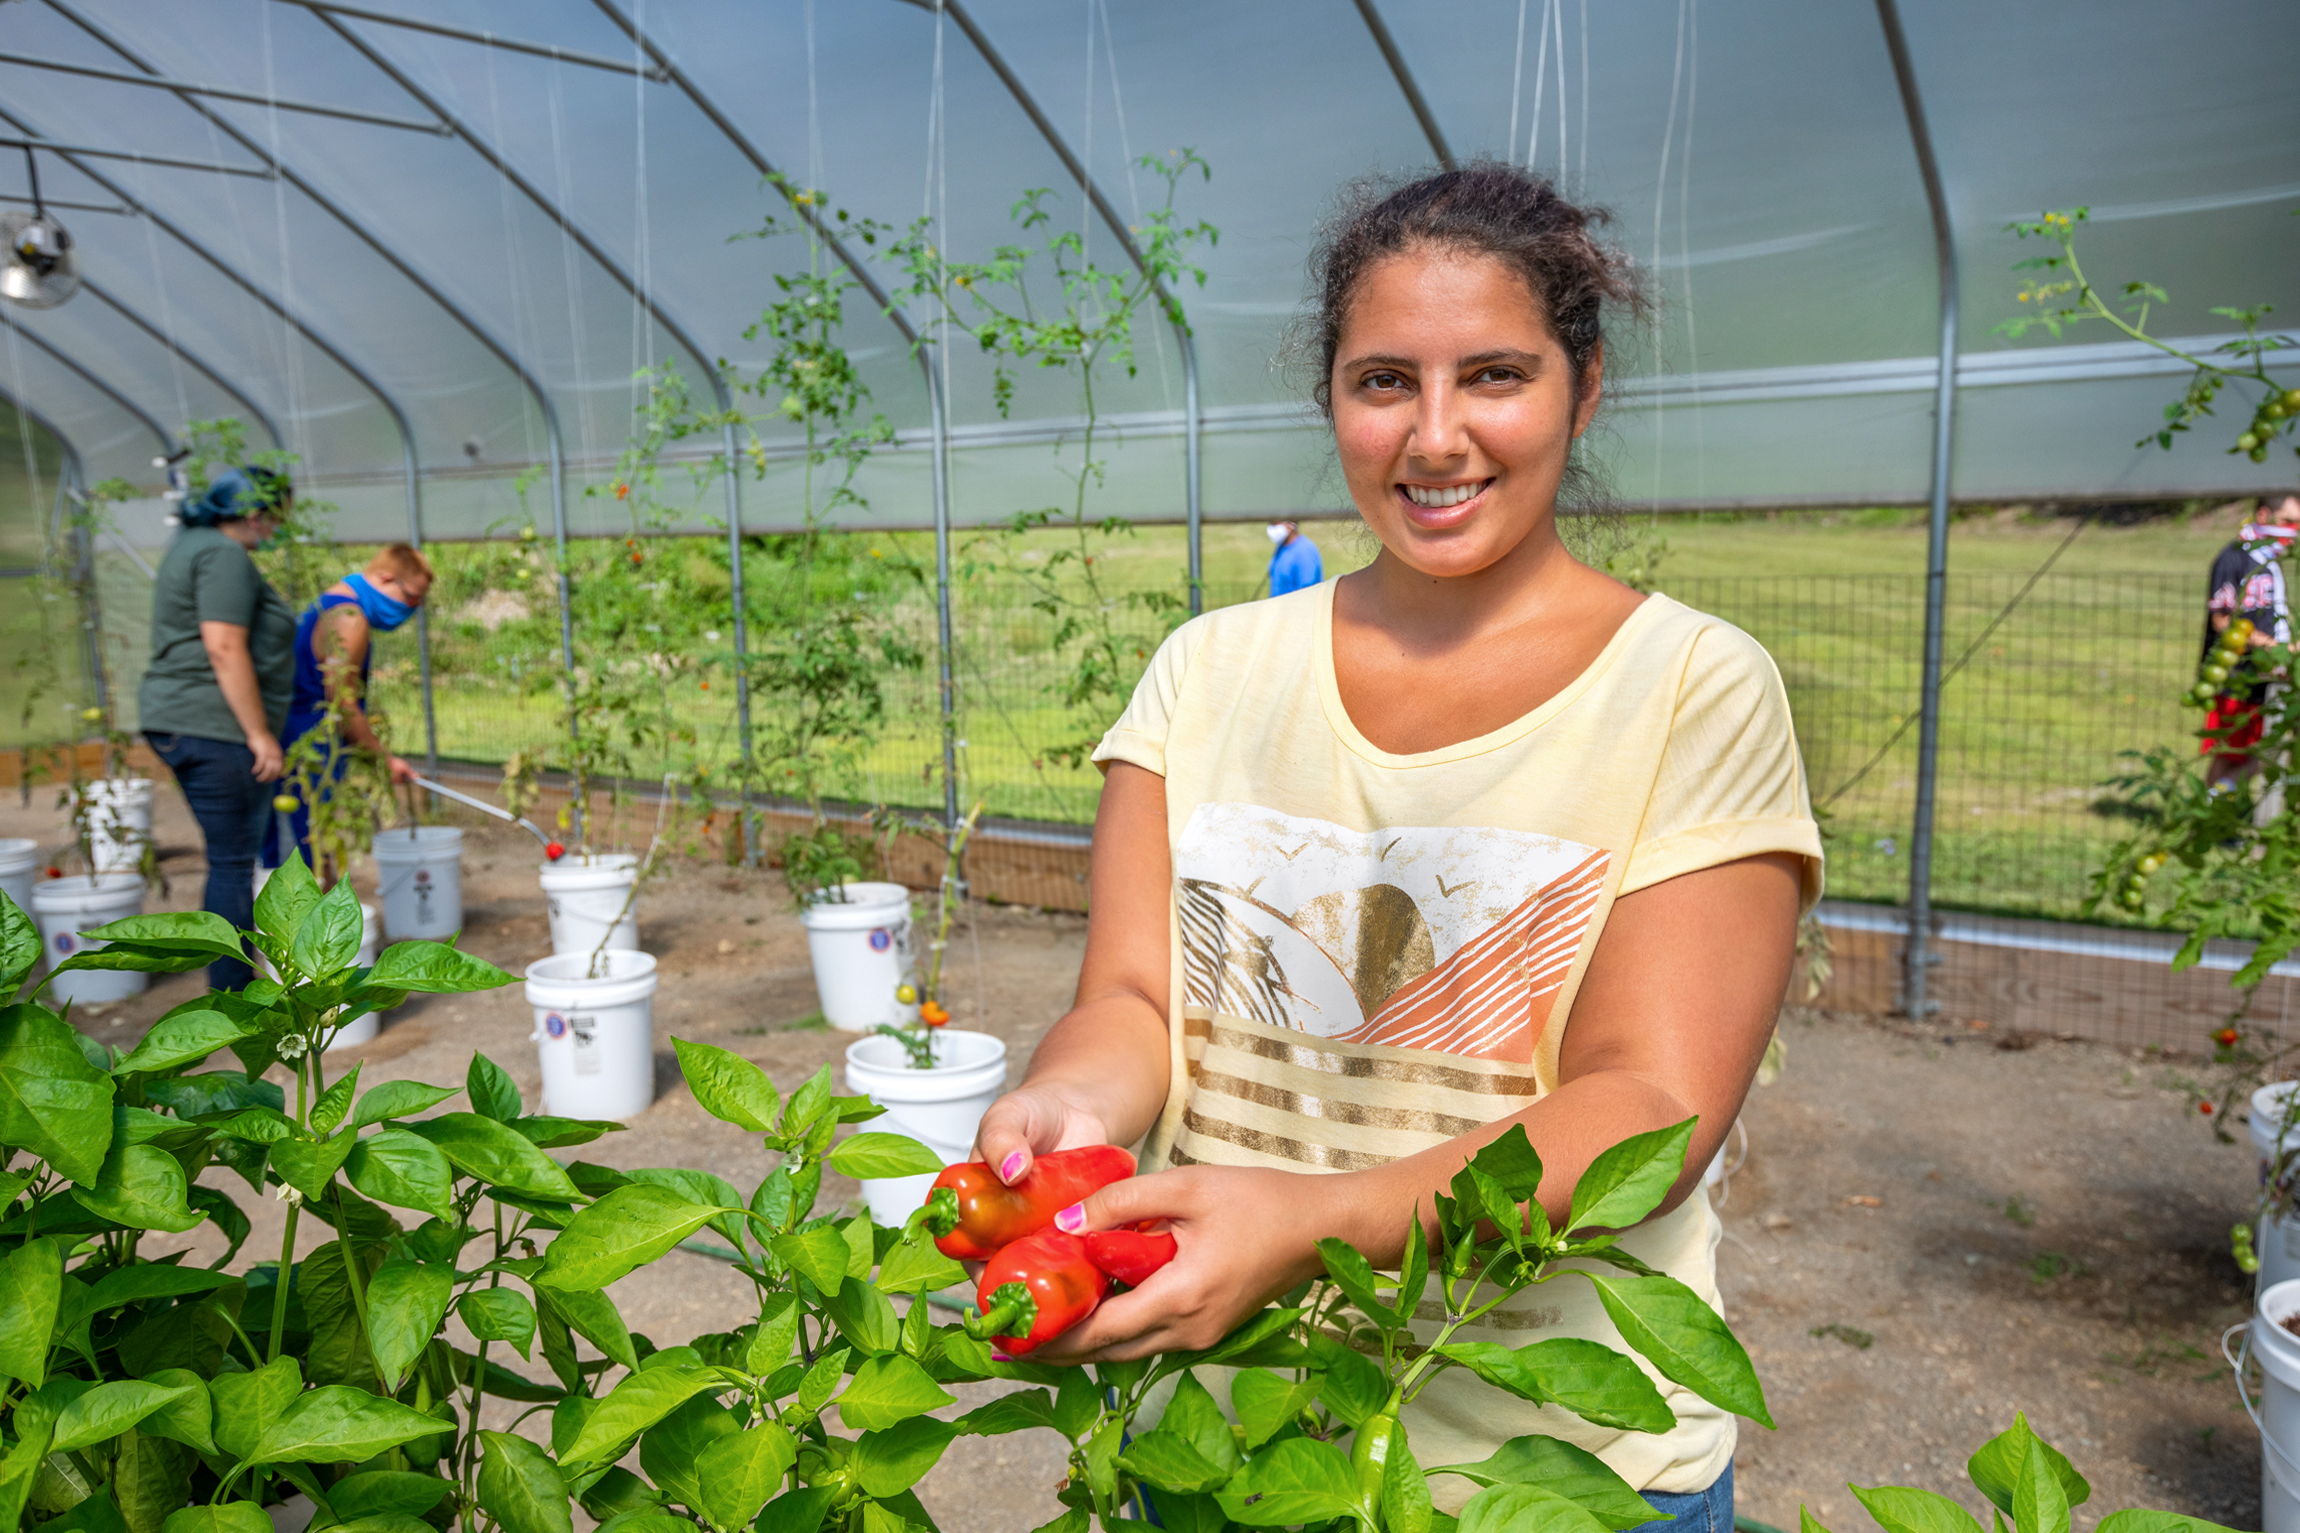 Agricultural skill training involves harvesting peppers in the greenhouse.